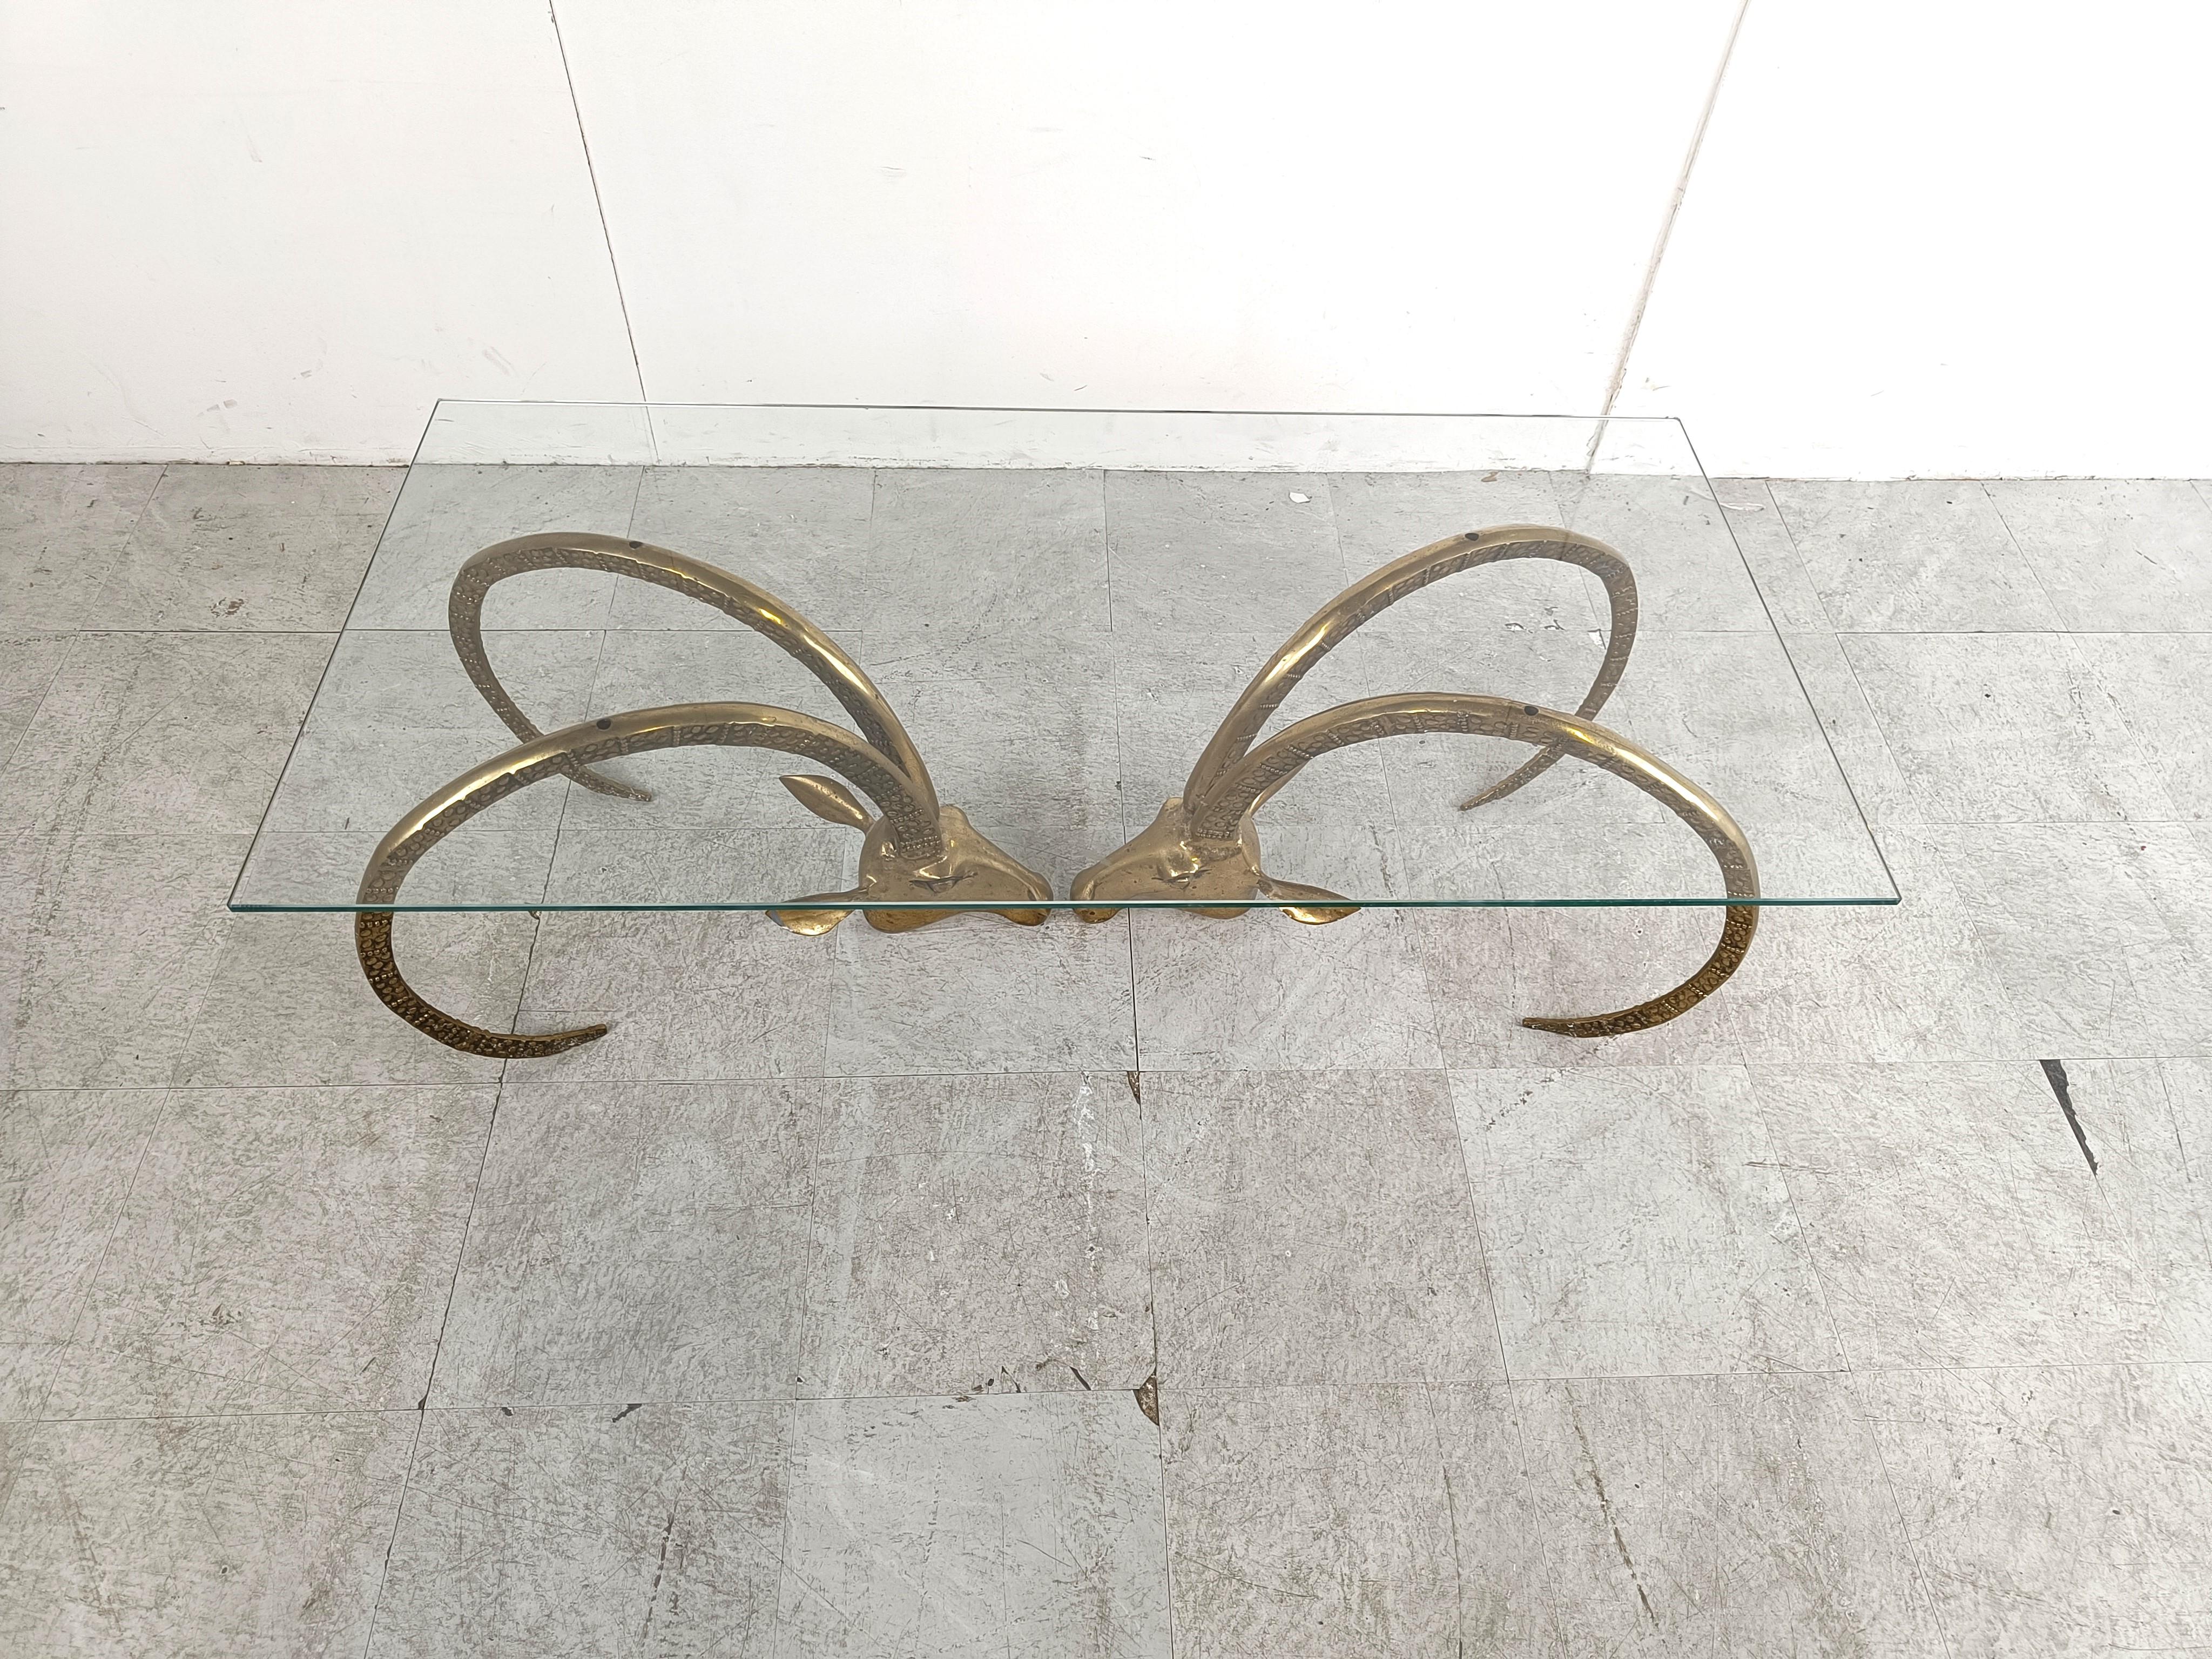 Seventies glam coffee table with a clear glass top supported by two brass ibex or antilopes sculptures.

Elegant shape with the right patina.

Sometimes attributed to Alain Chervet

1970s - France

Dimensions:
Table:
Height: 42cm/16.53